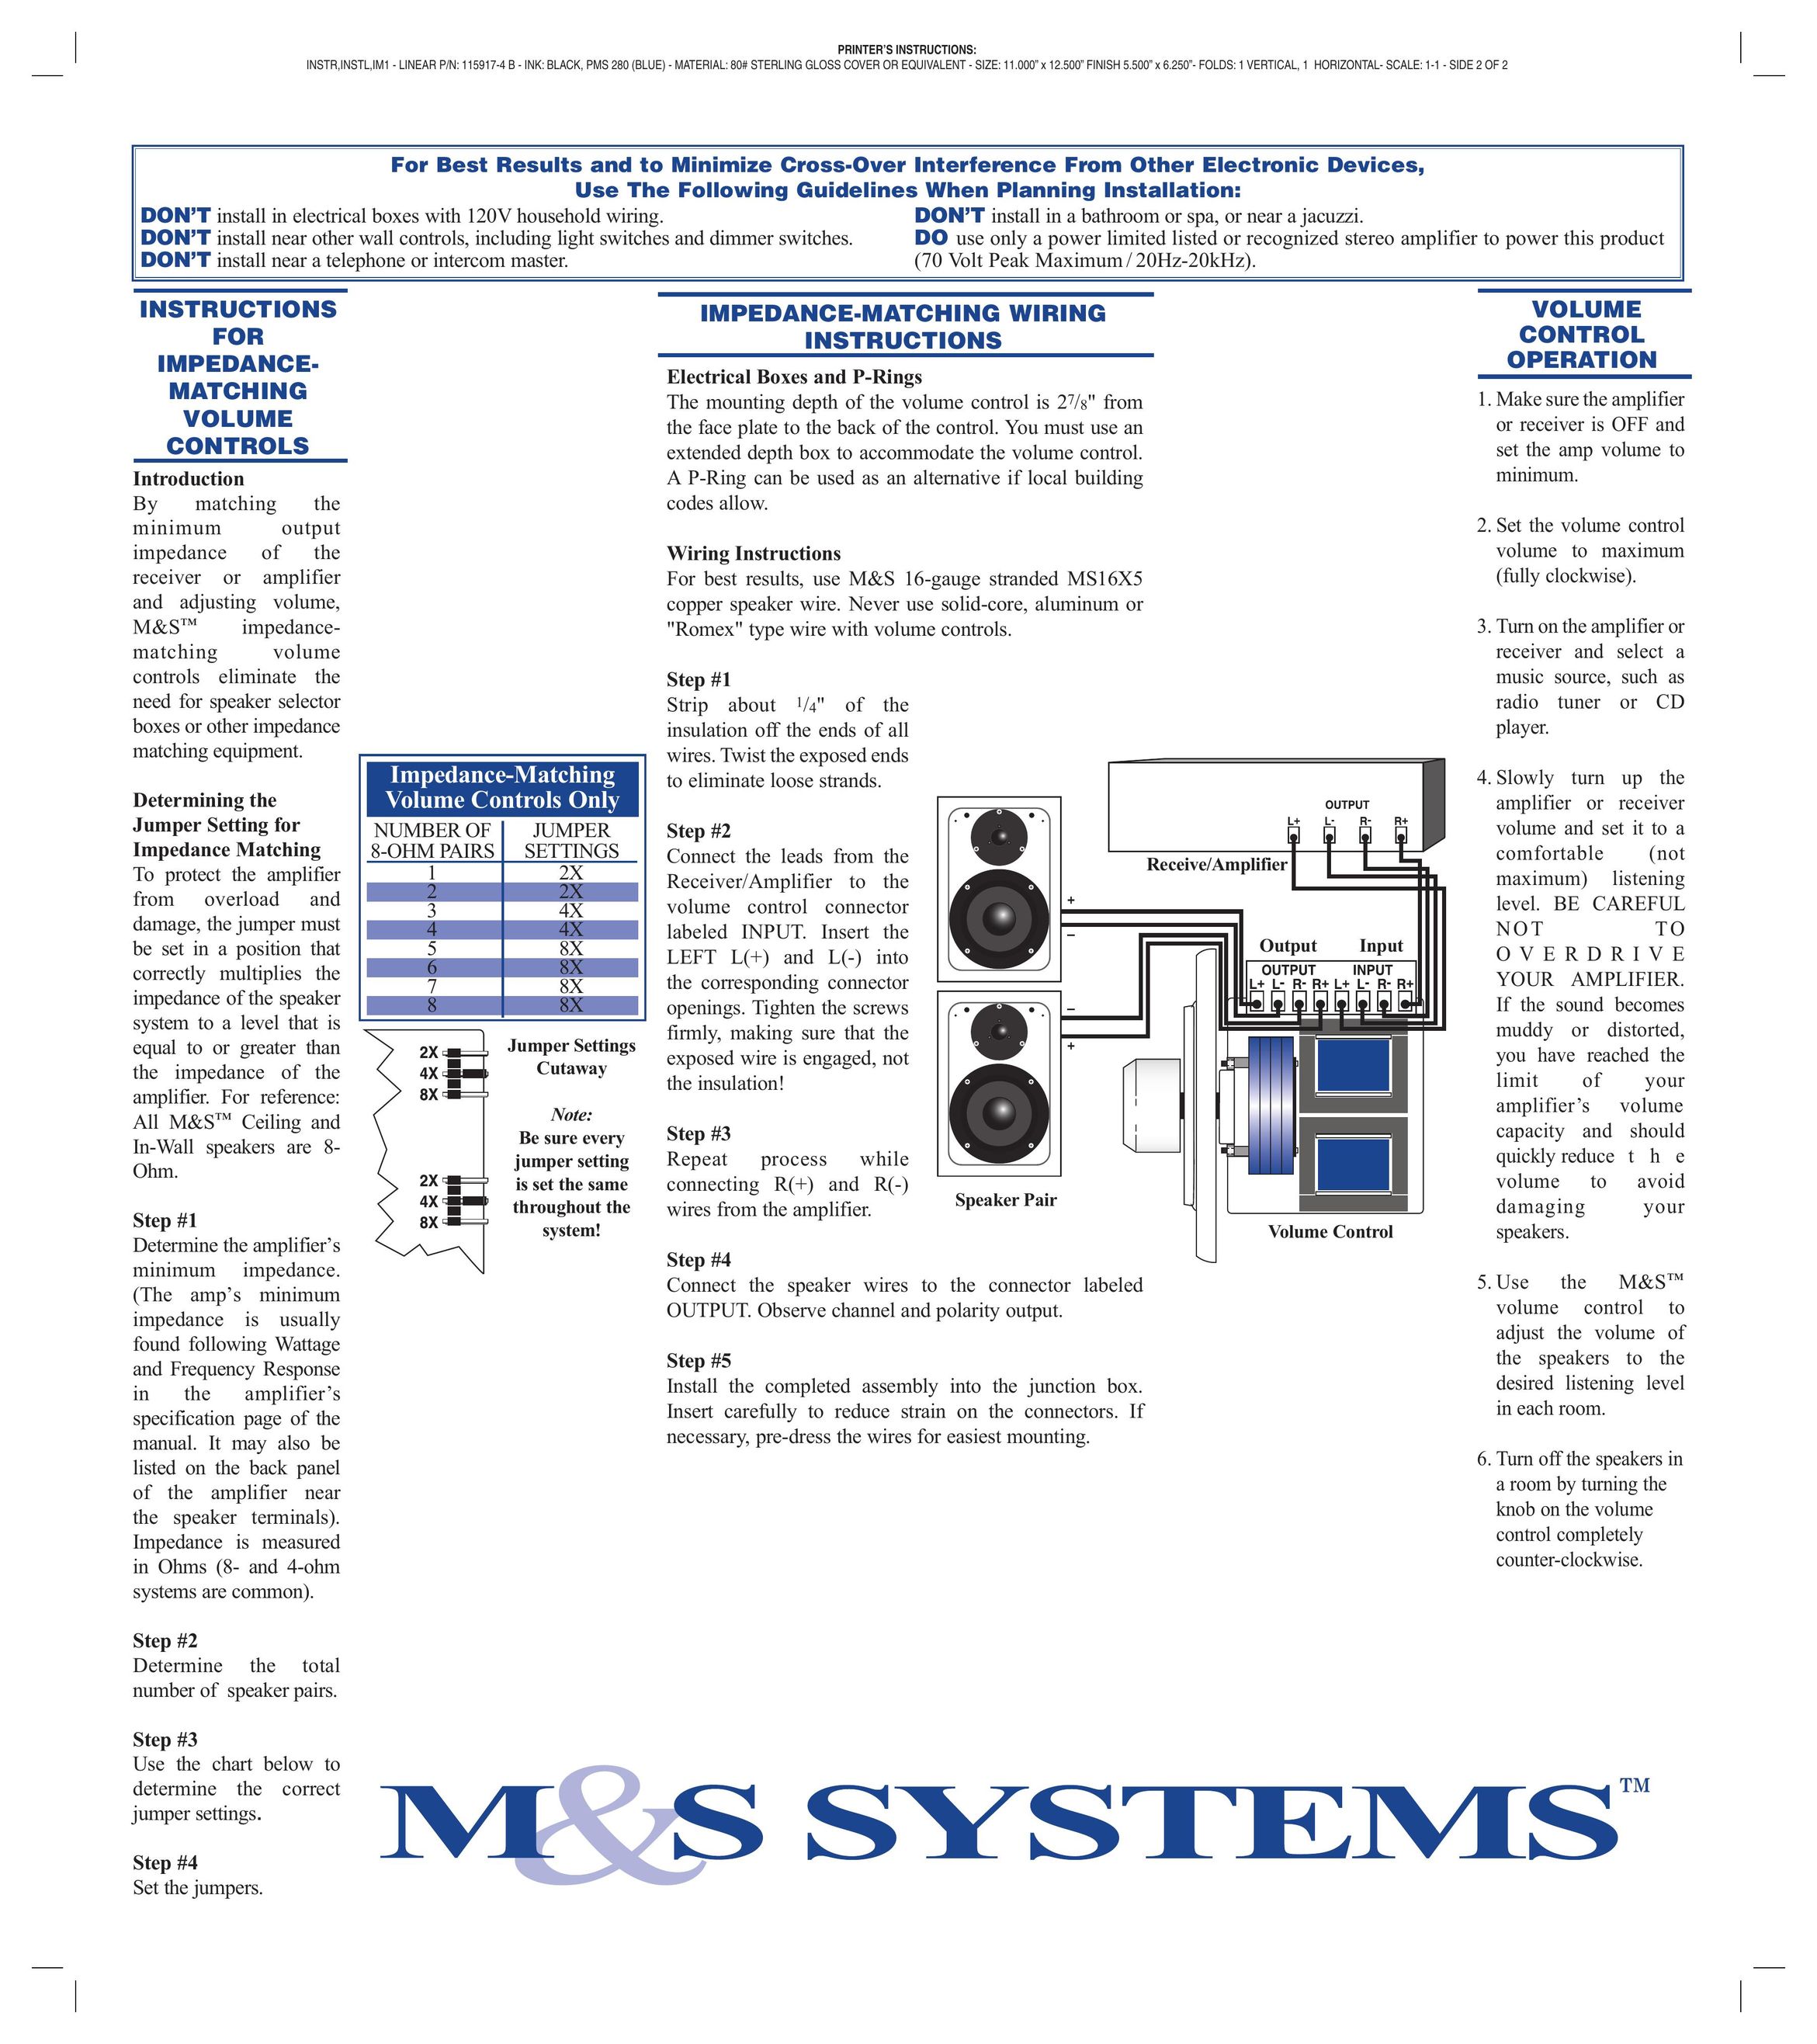 M&S Systems Car Amplifier Car Amplifier User Manual (Page 1)